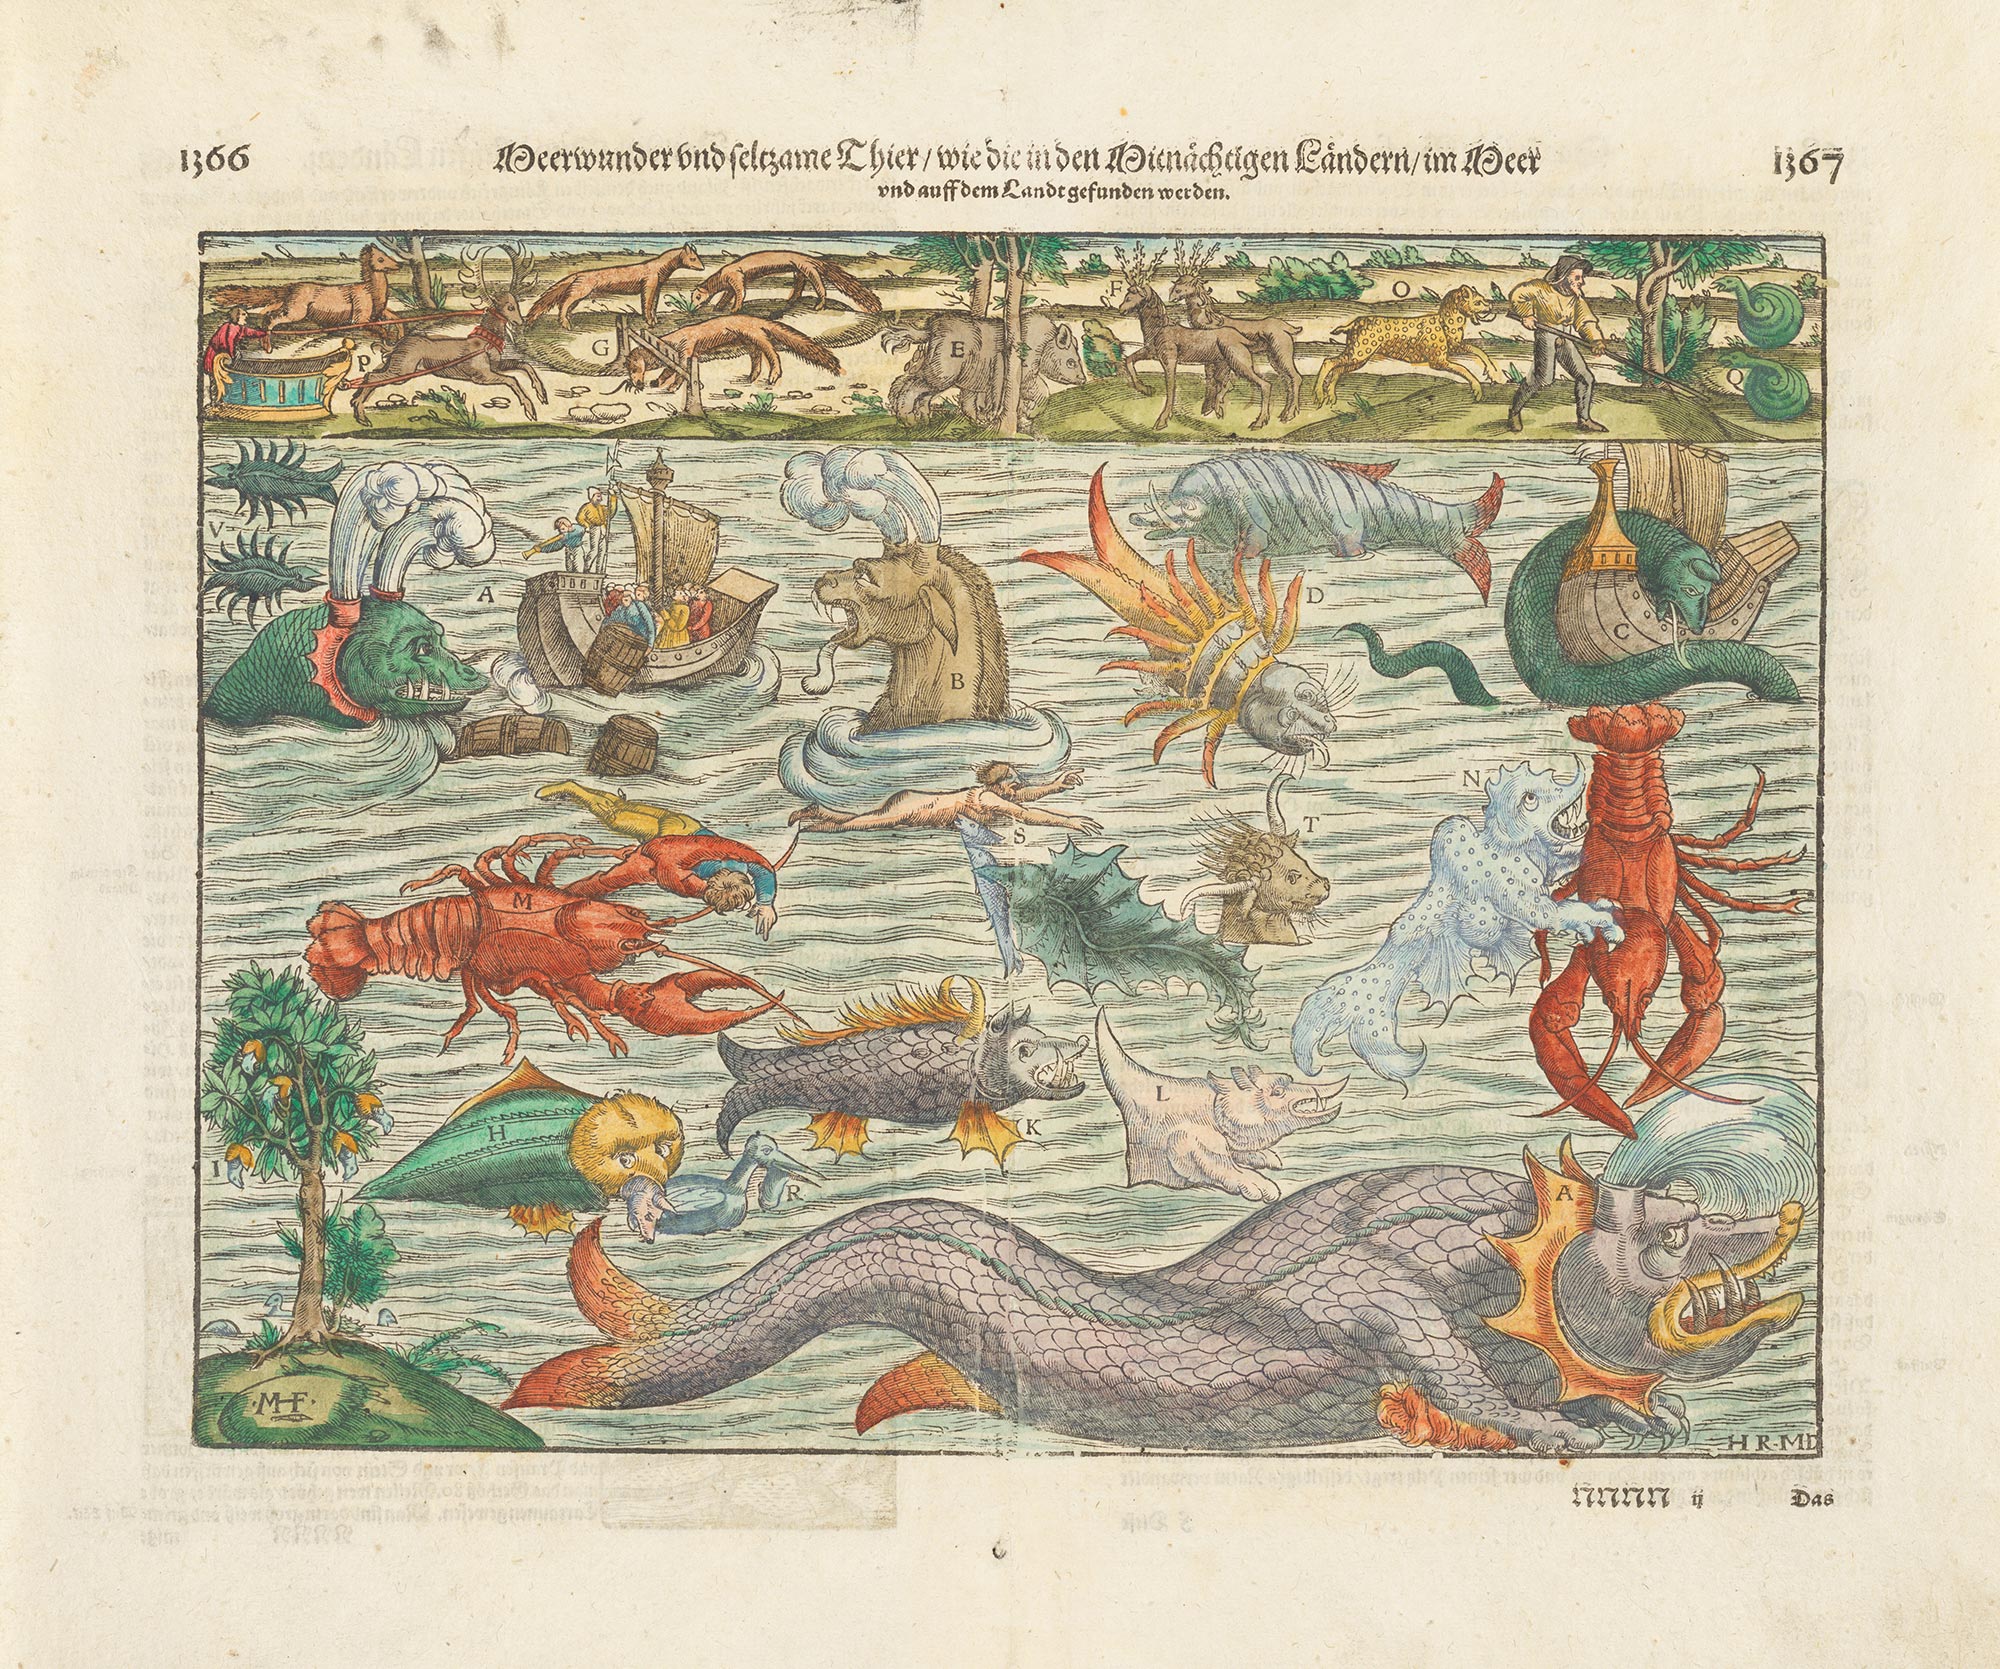 Colourful woodcut depicting sea monsters in the ocean.